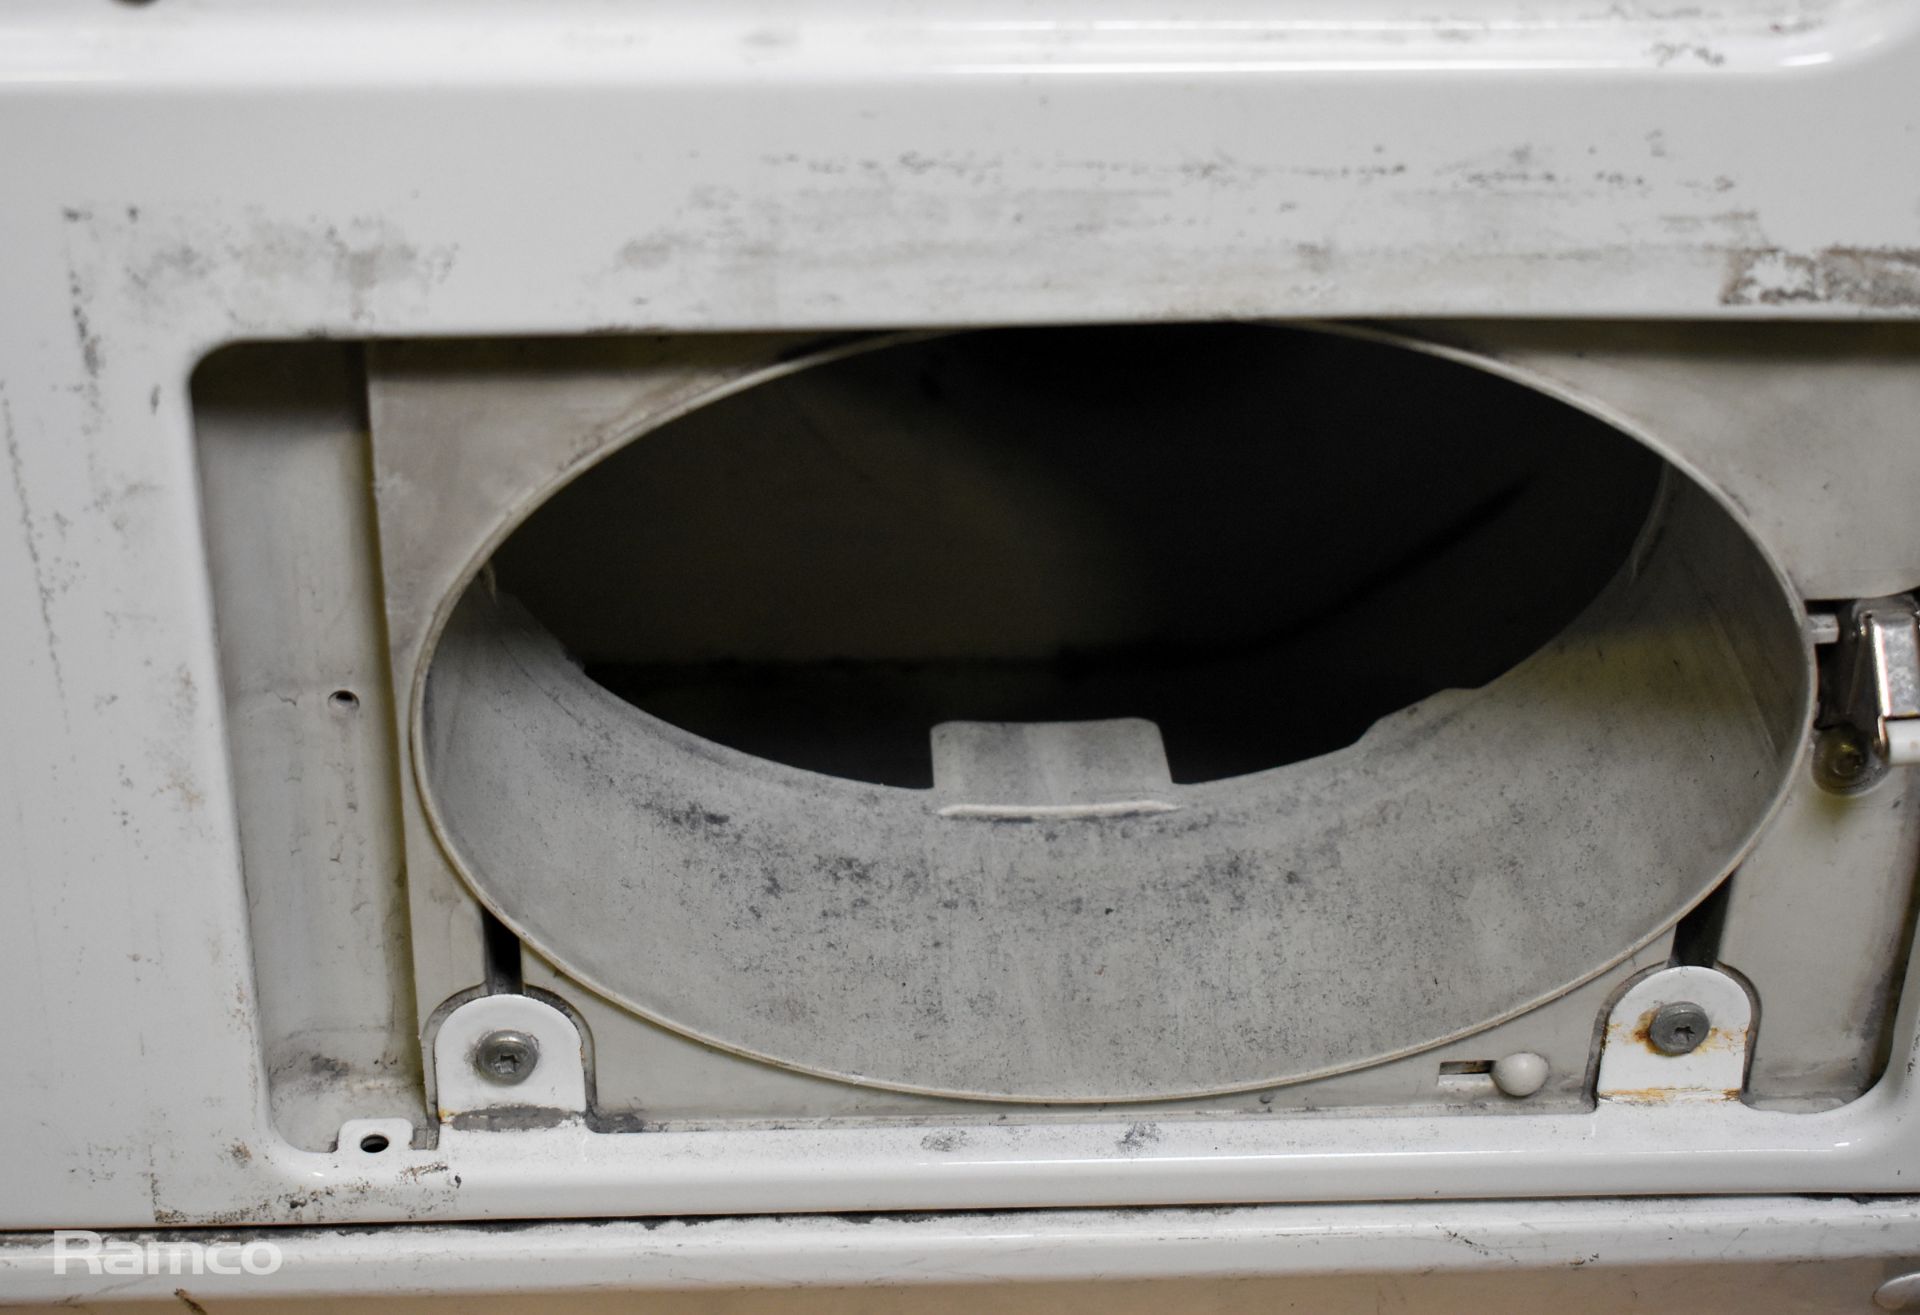 Miele PT 7136 6.5kg vented tumble dryer - W 595 x D 700 x H 850mm - MISSING FILTER COVER - Image 5 of 5